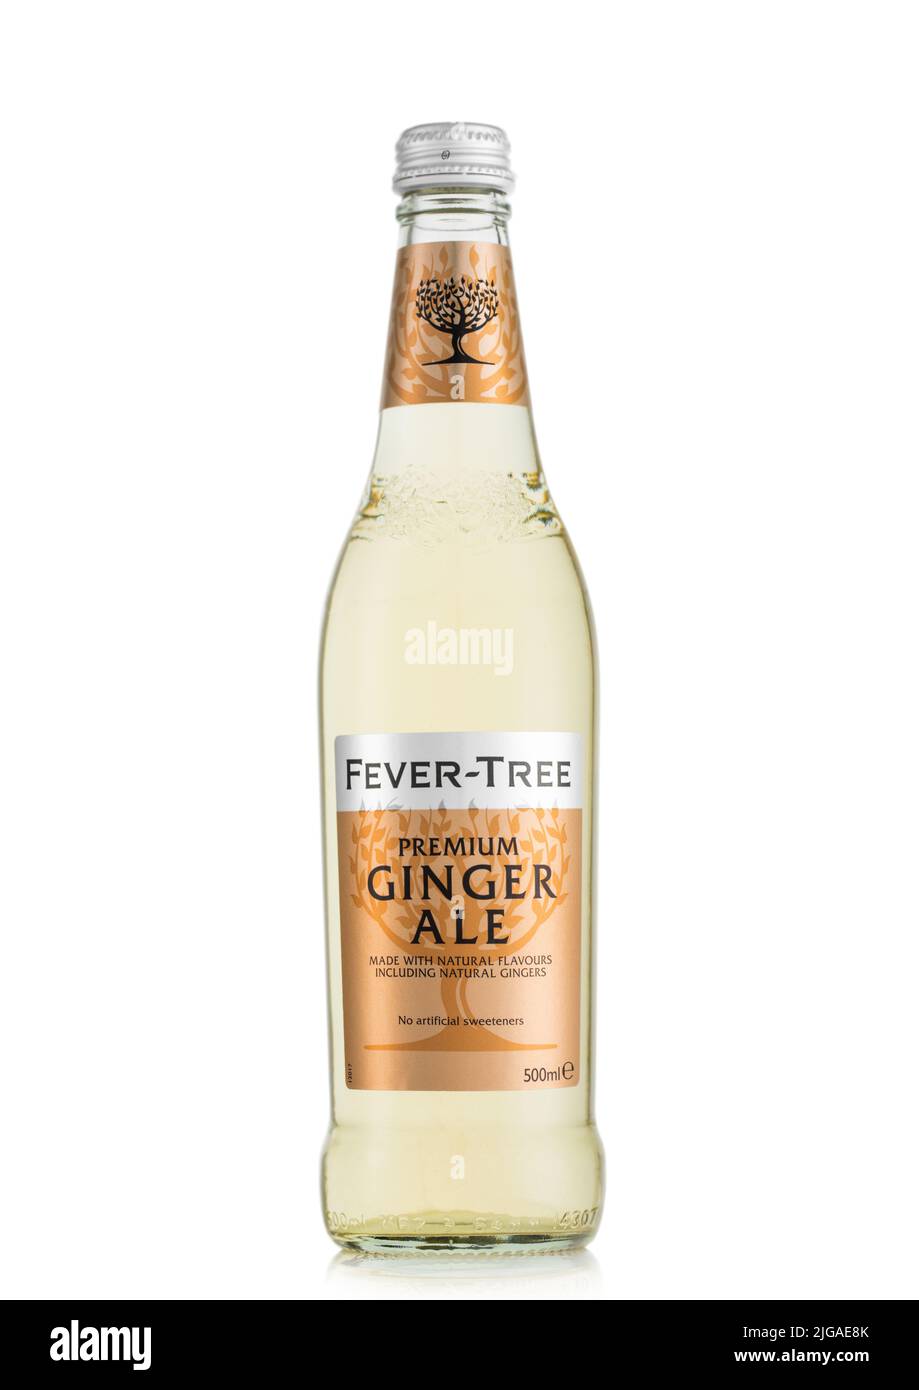 LONDON,UK - MAY 11, 2022: Bottle of Premium Ginger Ale soda drink by Fever Tree on white. Stock Photo